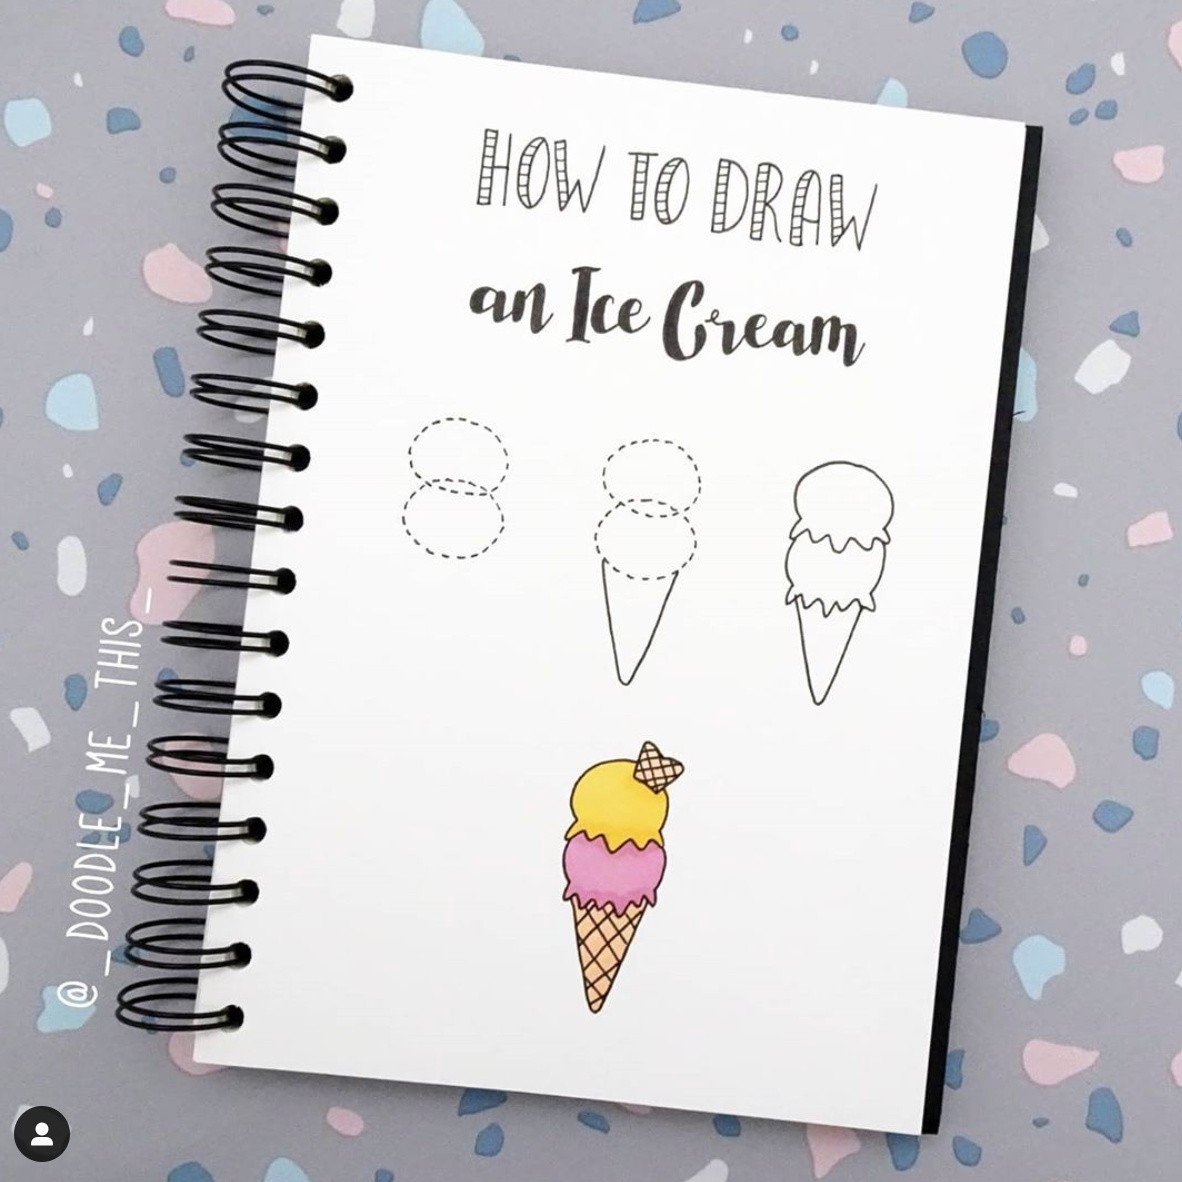 How to draw ice cream step by step